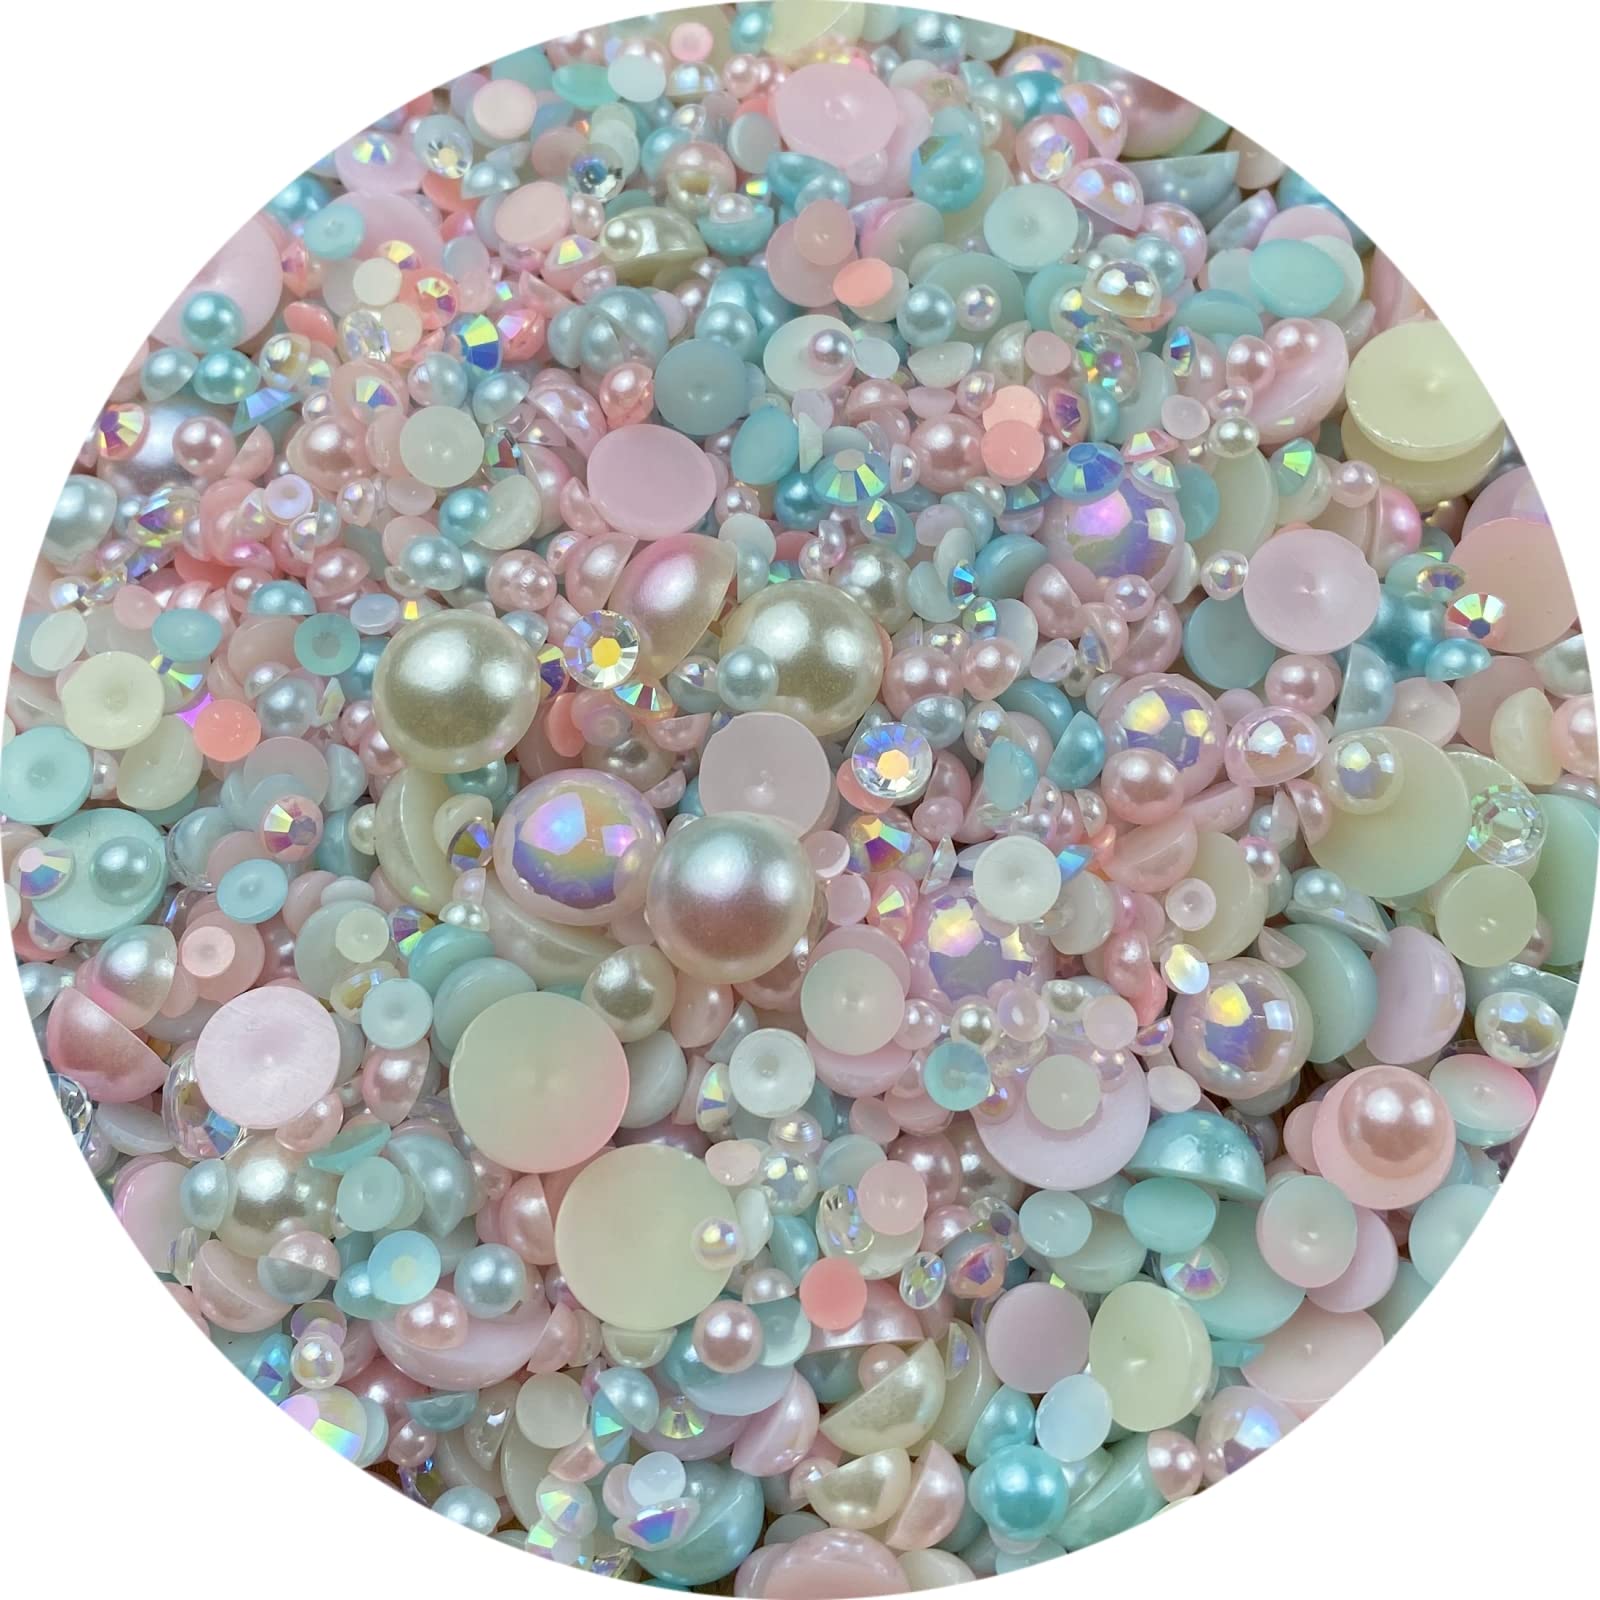 editTime 900pcs 4-20mm Random Mixed Styles Crafts Material Embellishments  Kit Resins Flatback Rhinestones Pearls Round Beads Charms for Crafts Mixed